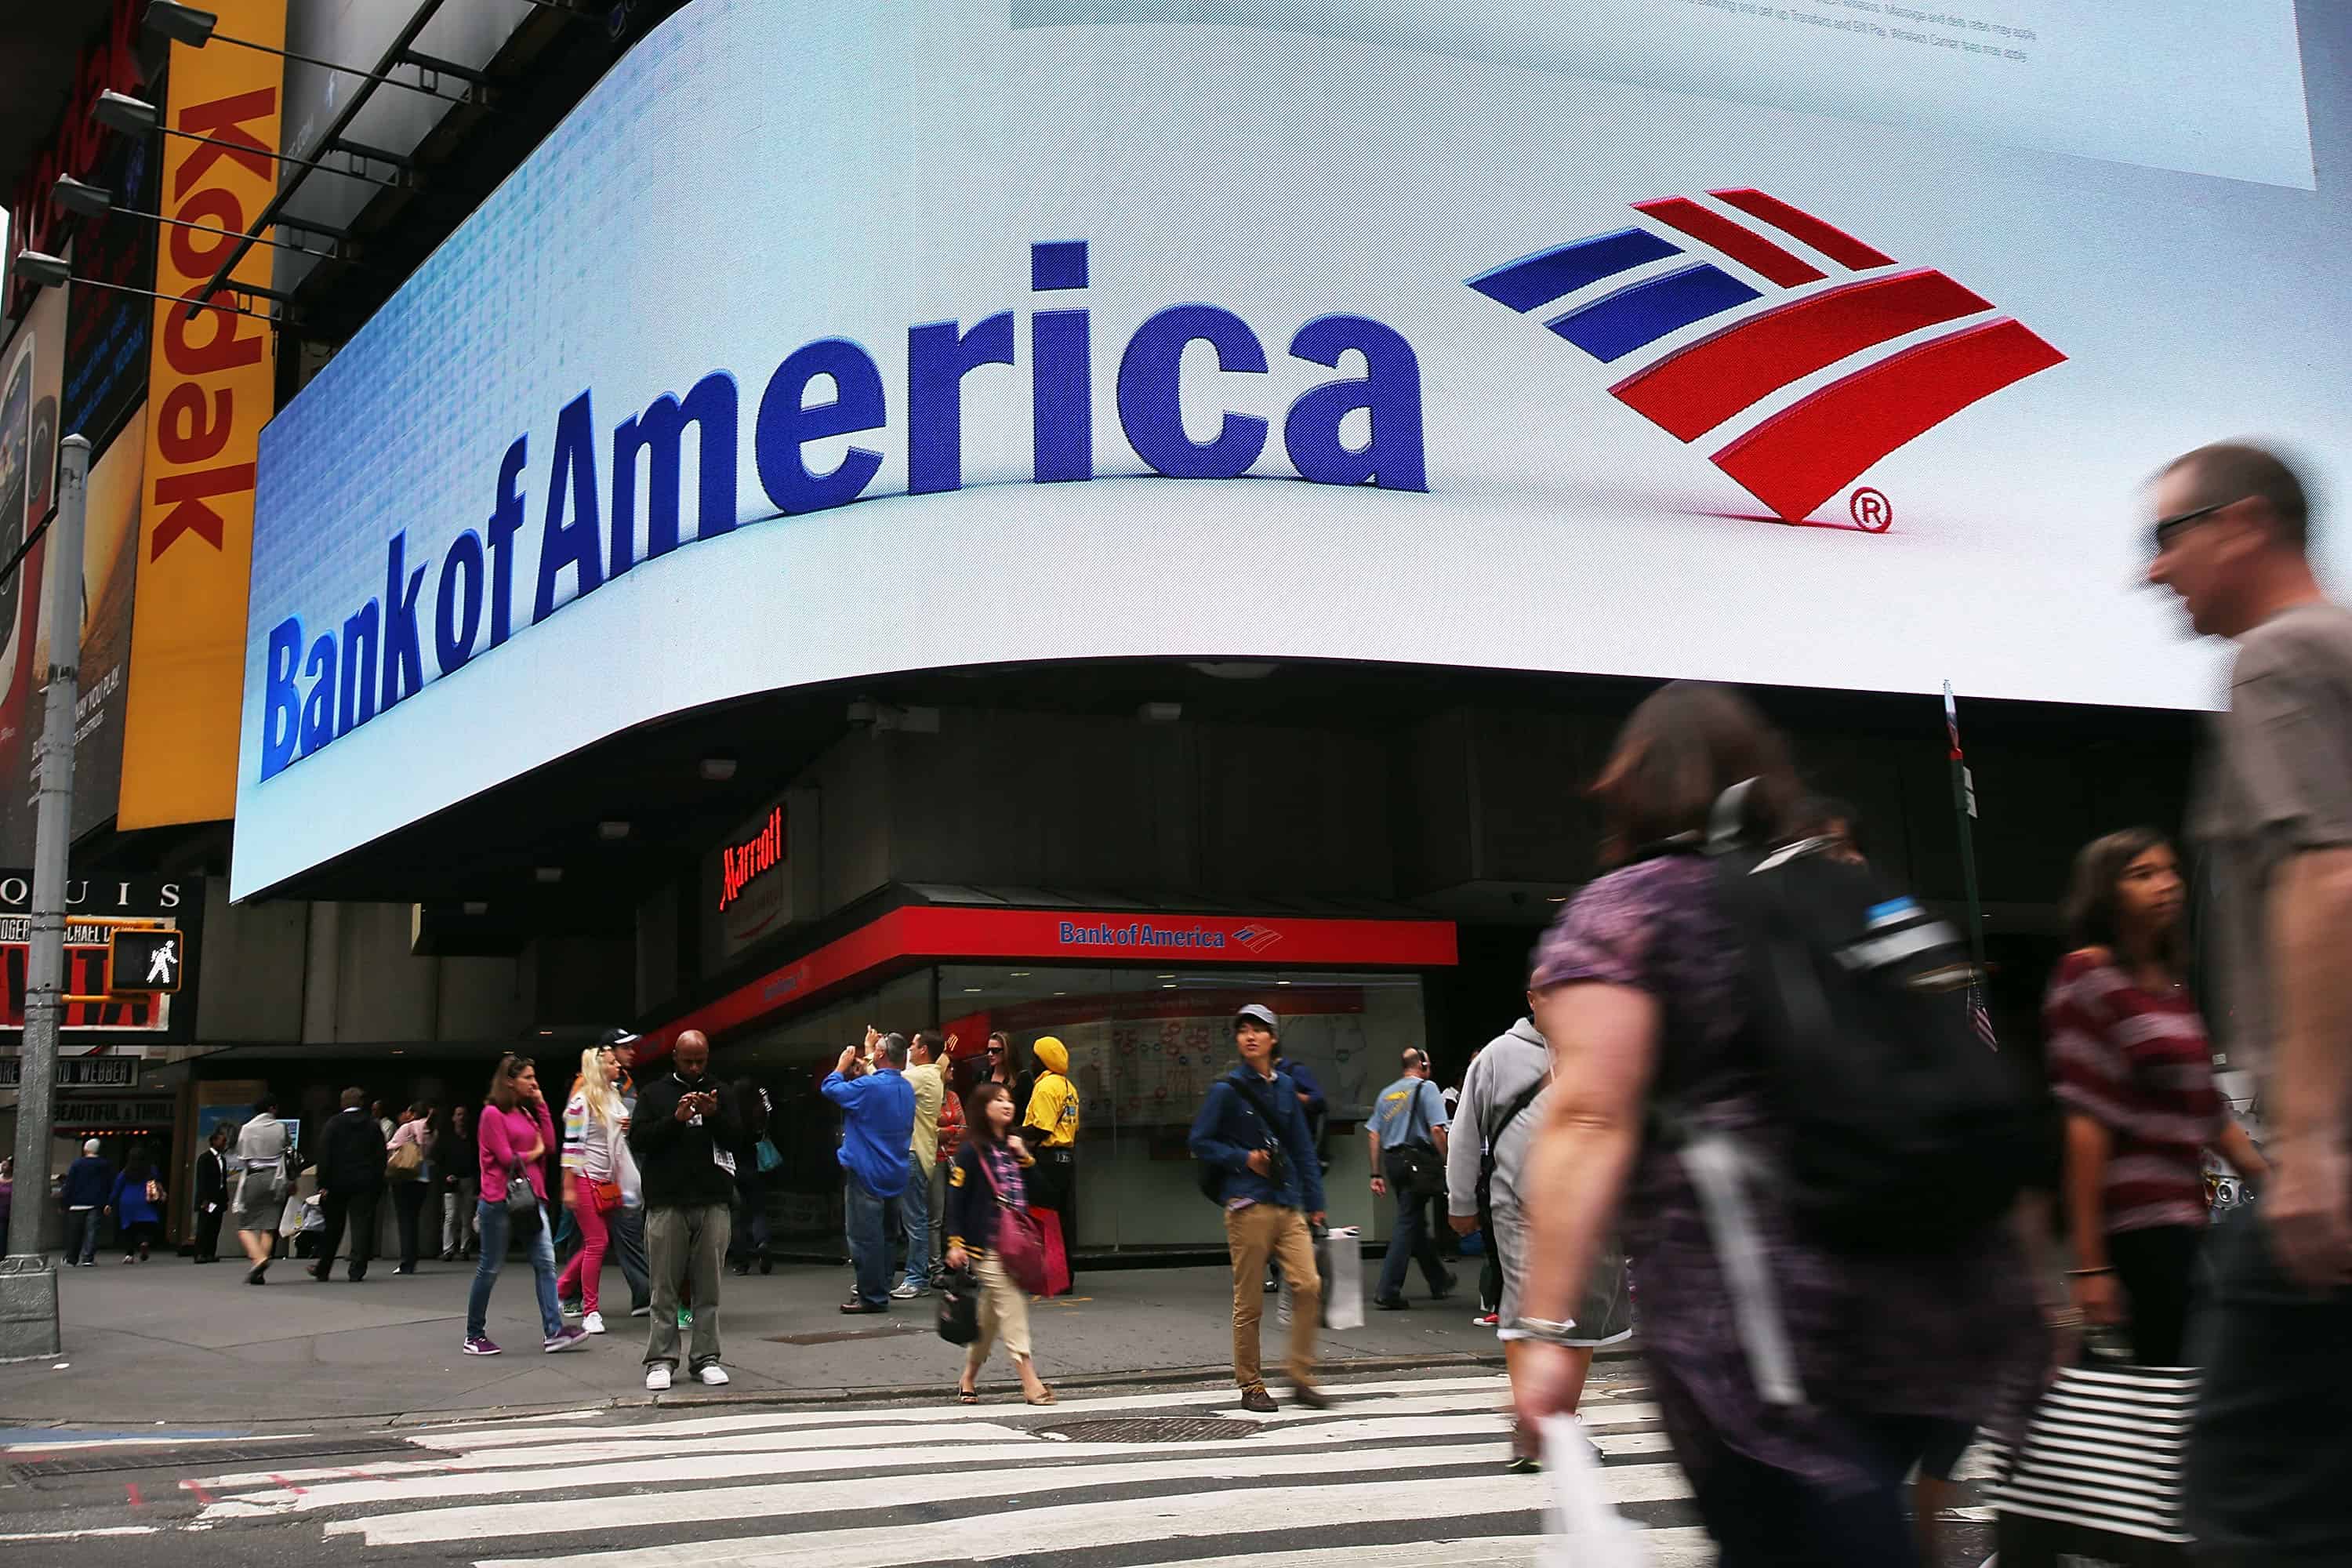 Bank of America, Intel announce thousands of layoffs in Costa Rica